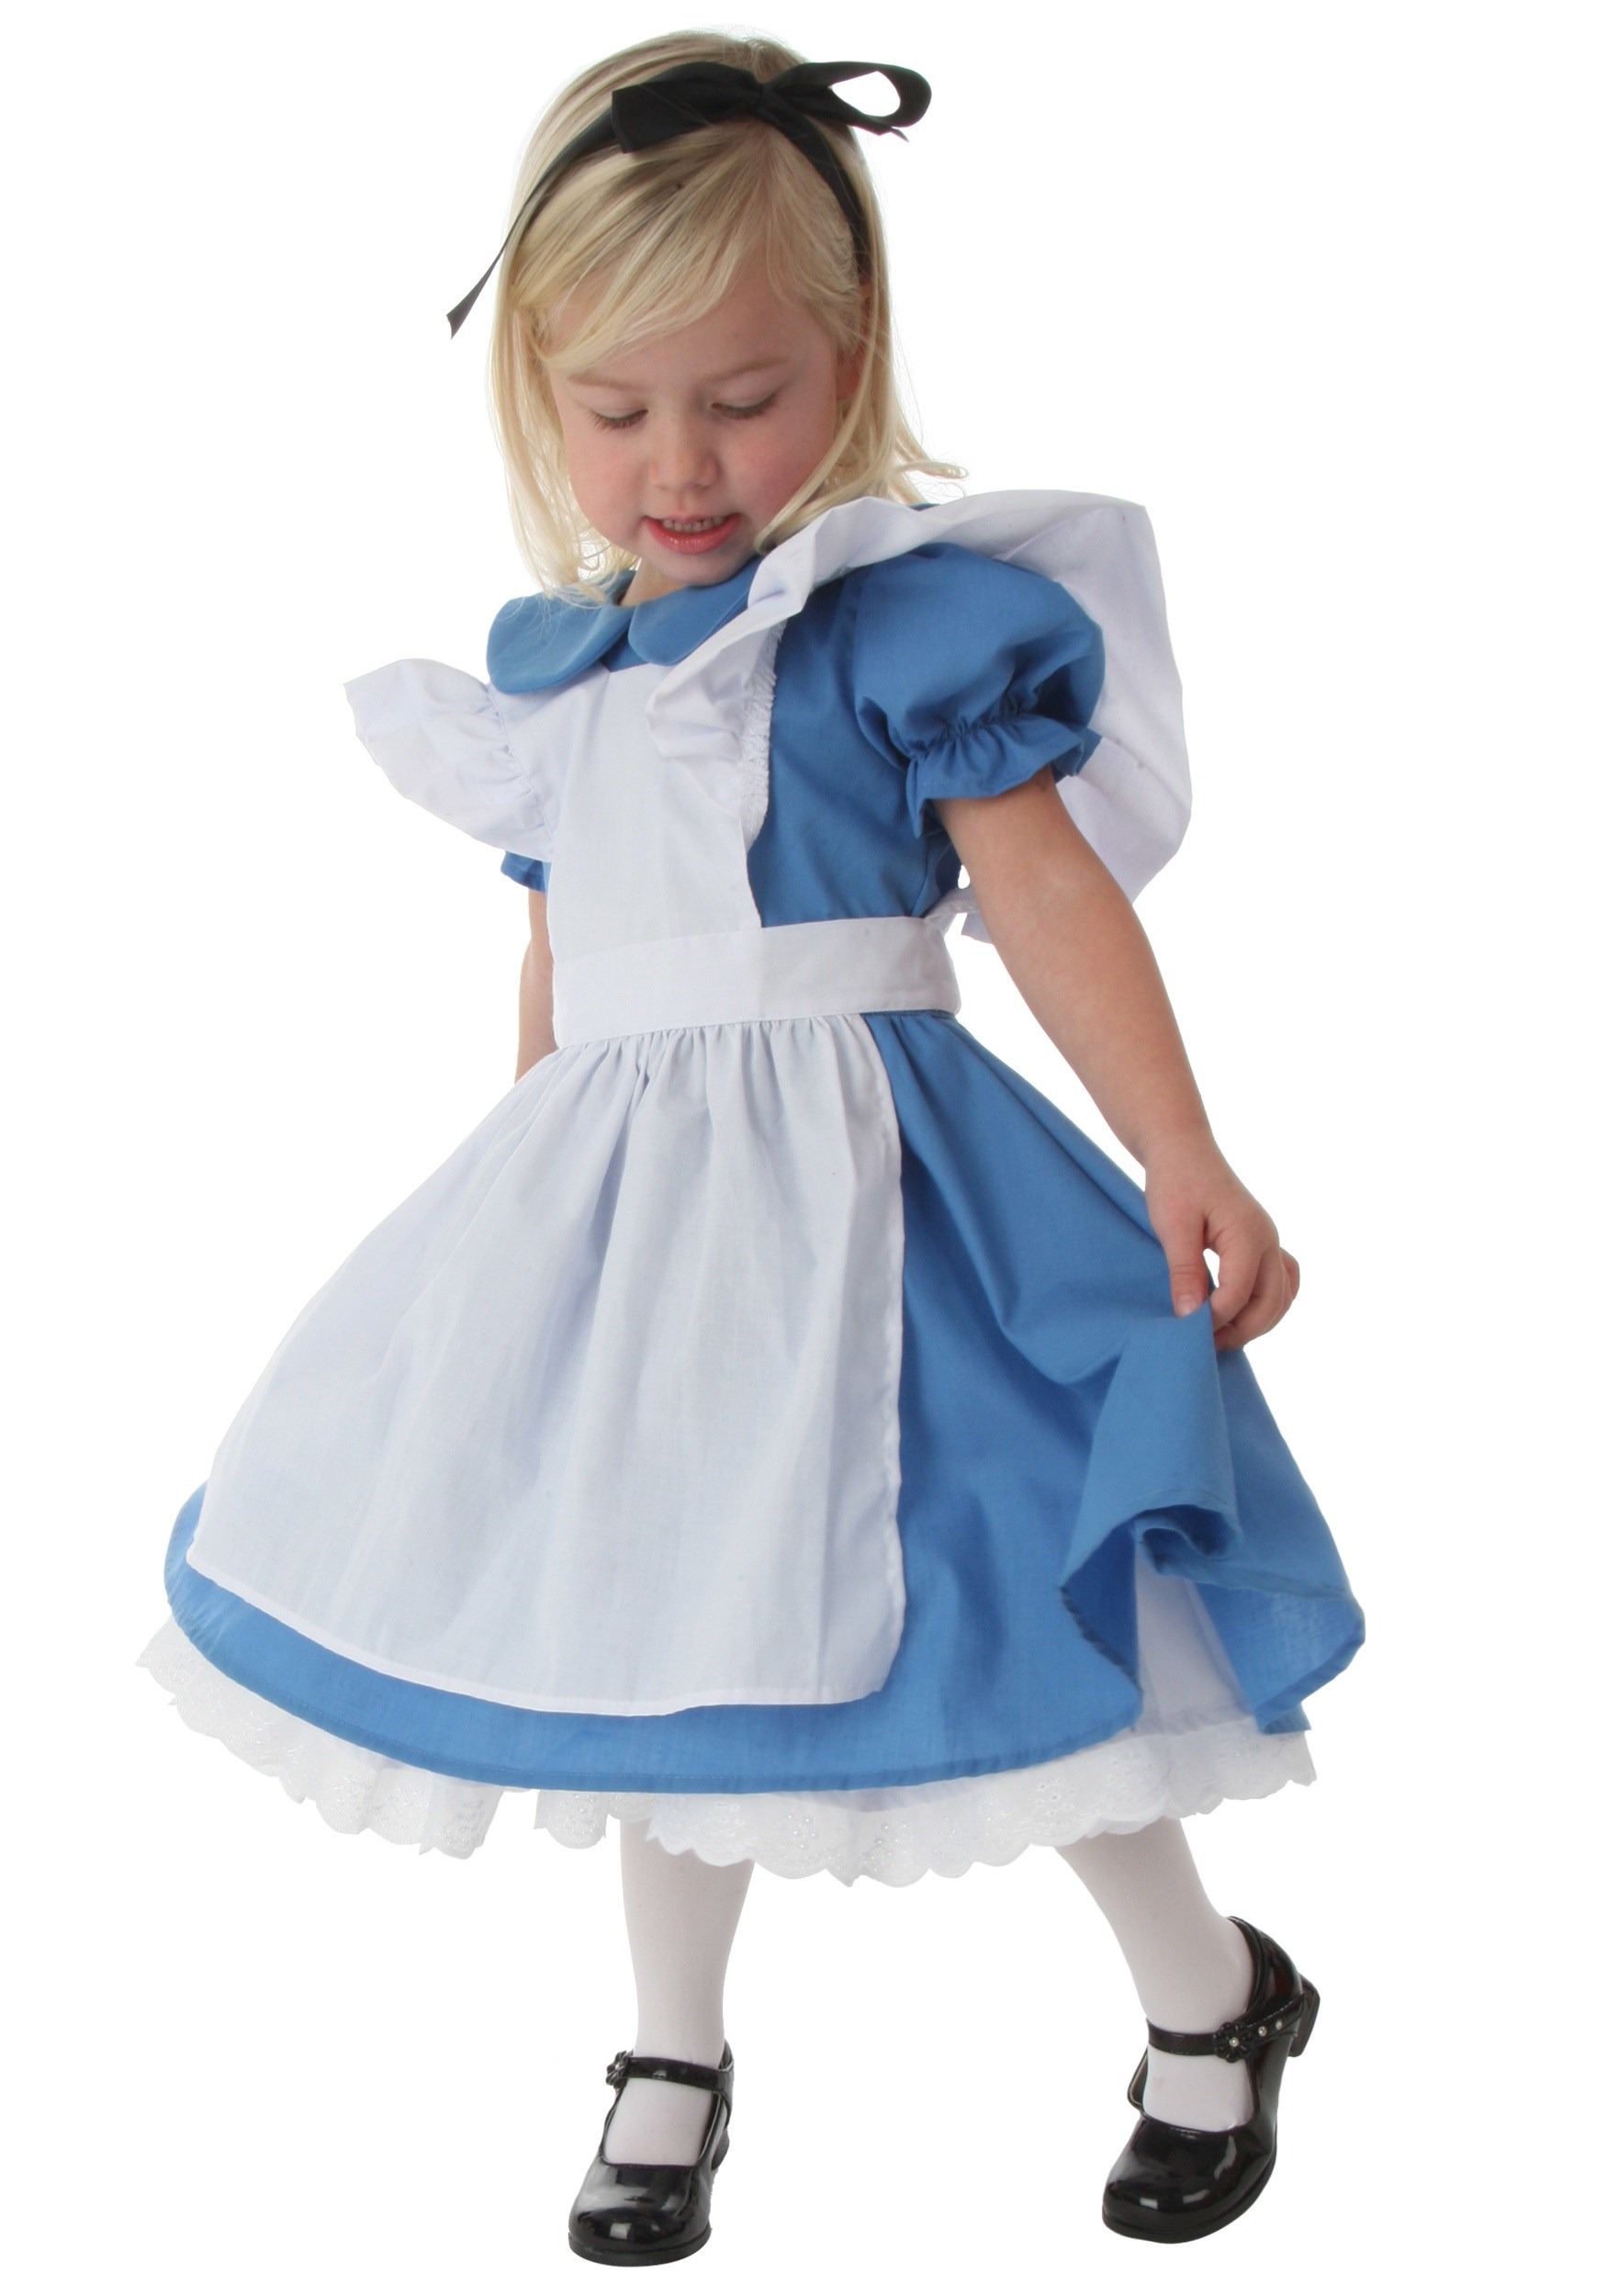 Photos - Fancy Dress Deluxe FUN Costumes Toddler Girls Alice Costume  | Exclusive | Made By Us B 